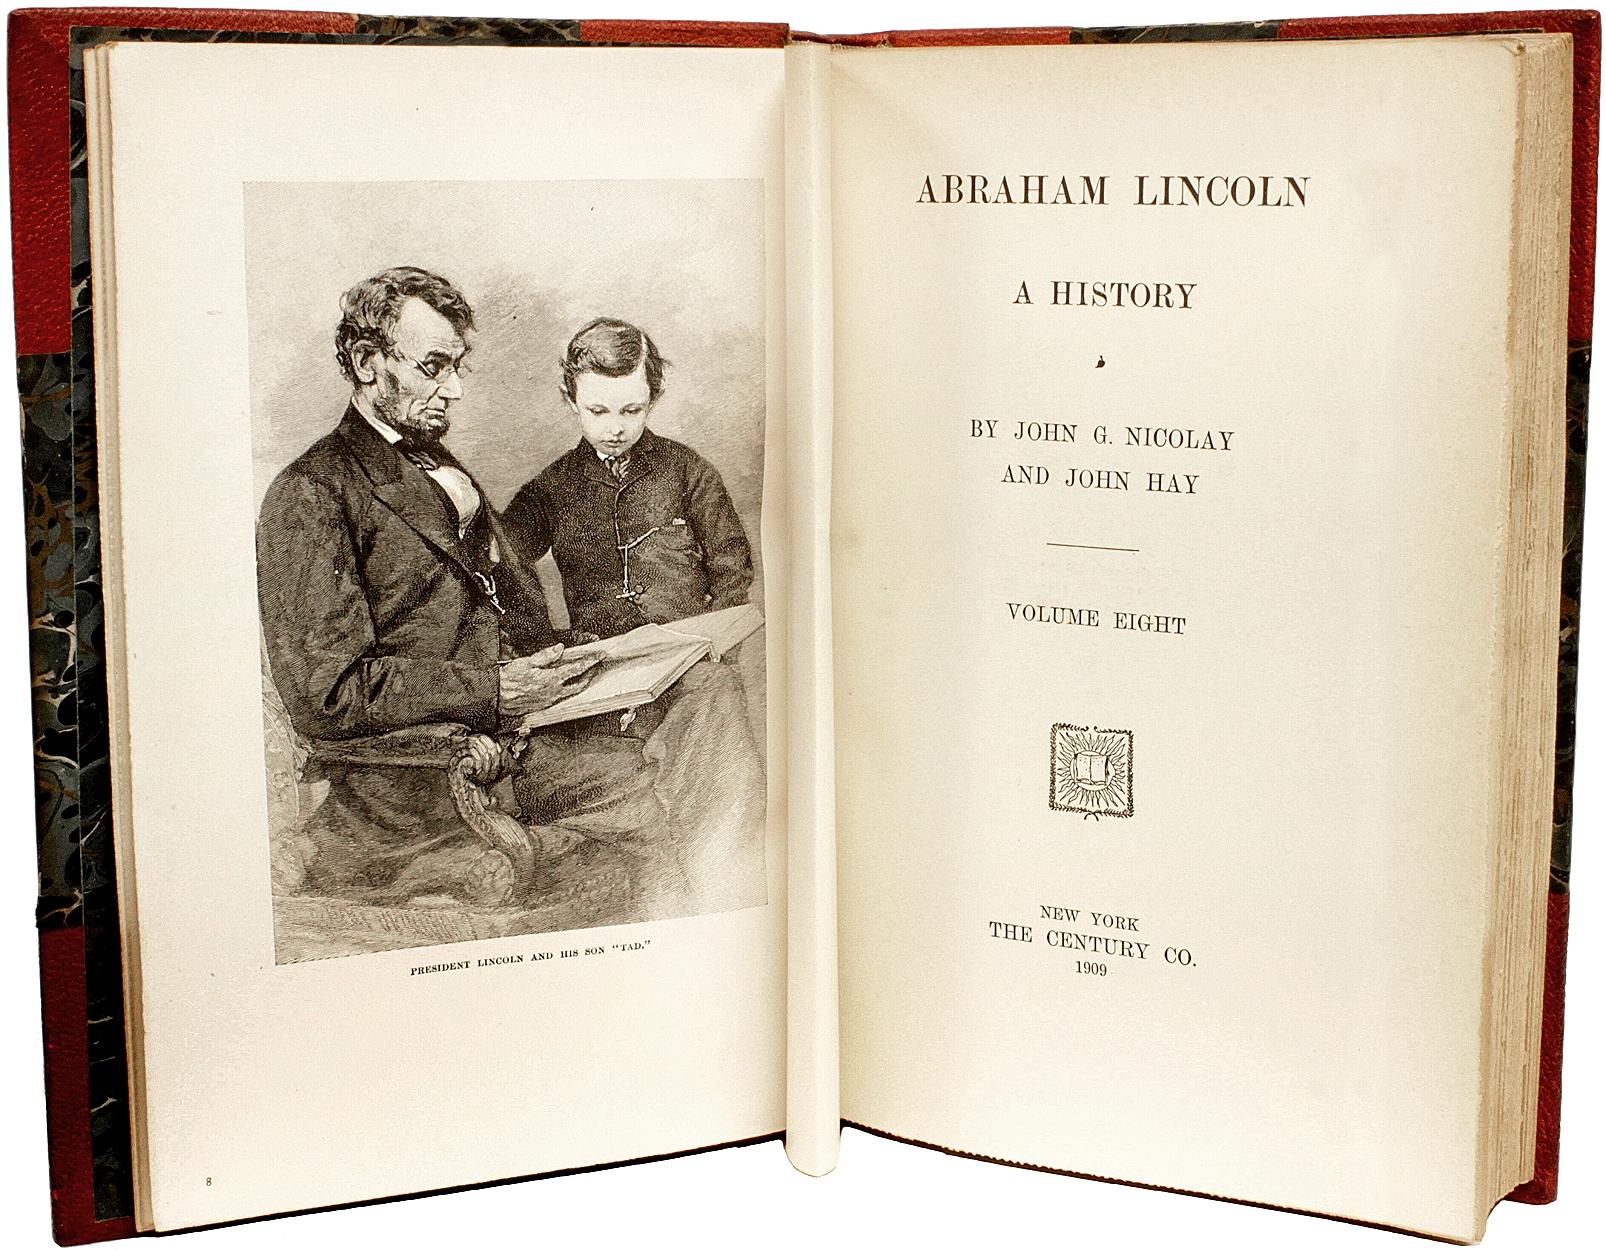 Author: NICOLAY, John G. & John Hay. 

Title: Abraham Lincoln A History.

Publisher: NY: The Century Co., 1909.

Description: IN THE PUBLISHER'S DELUXE BINDING. 10 vols., 9-3/16